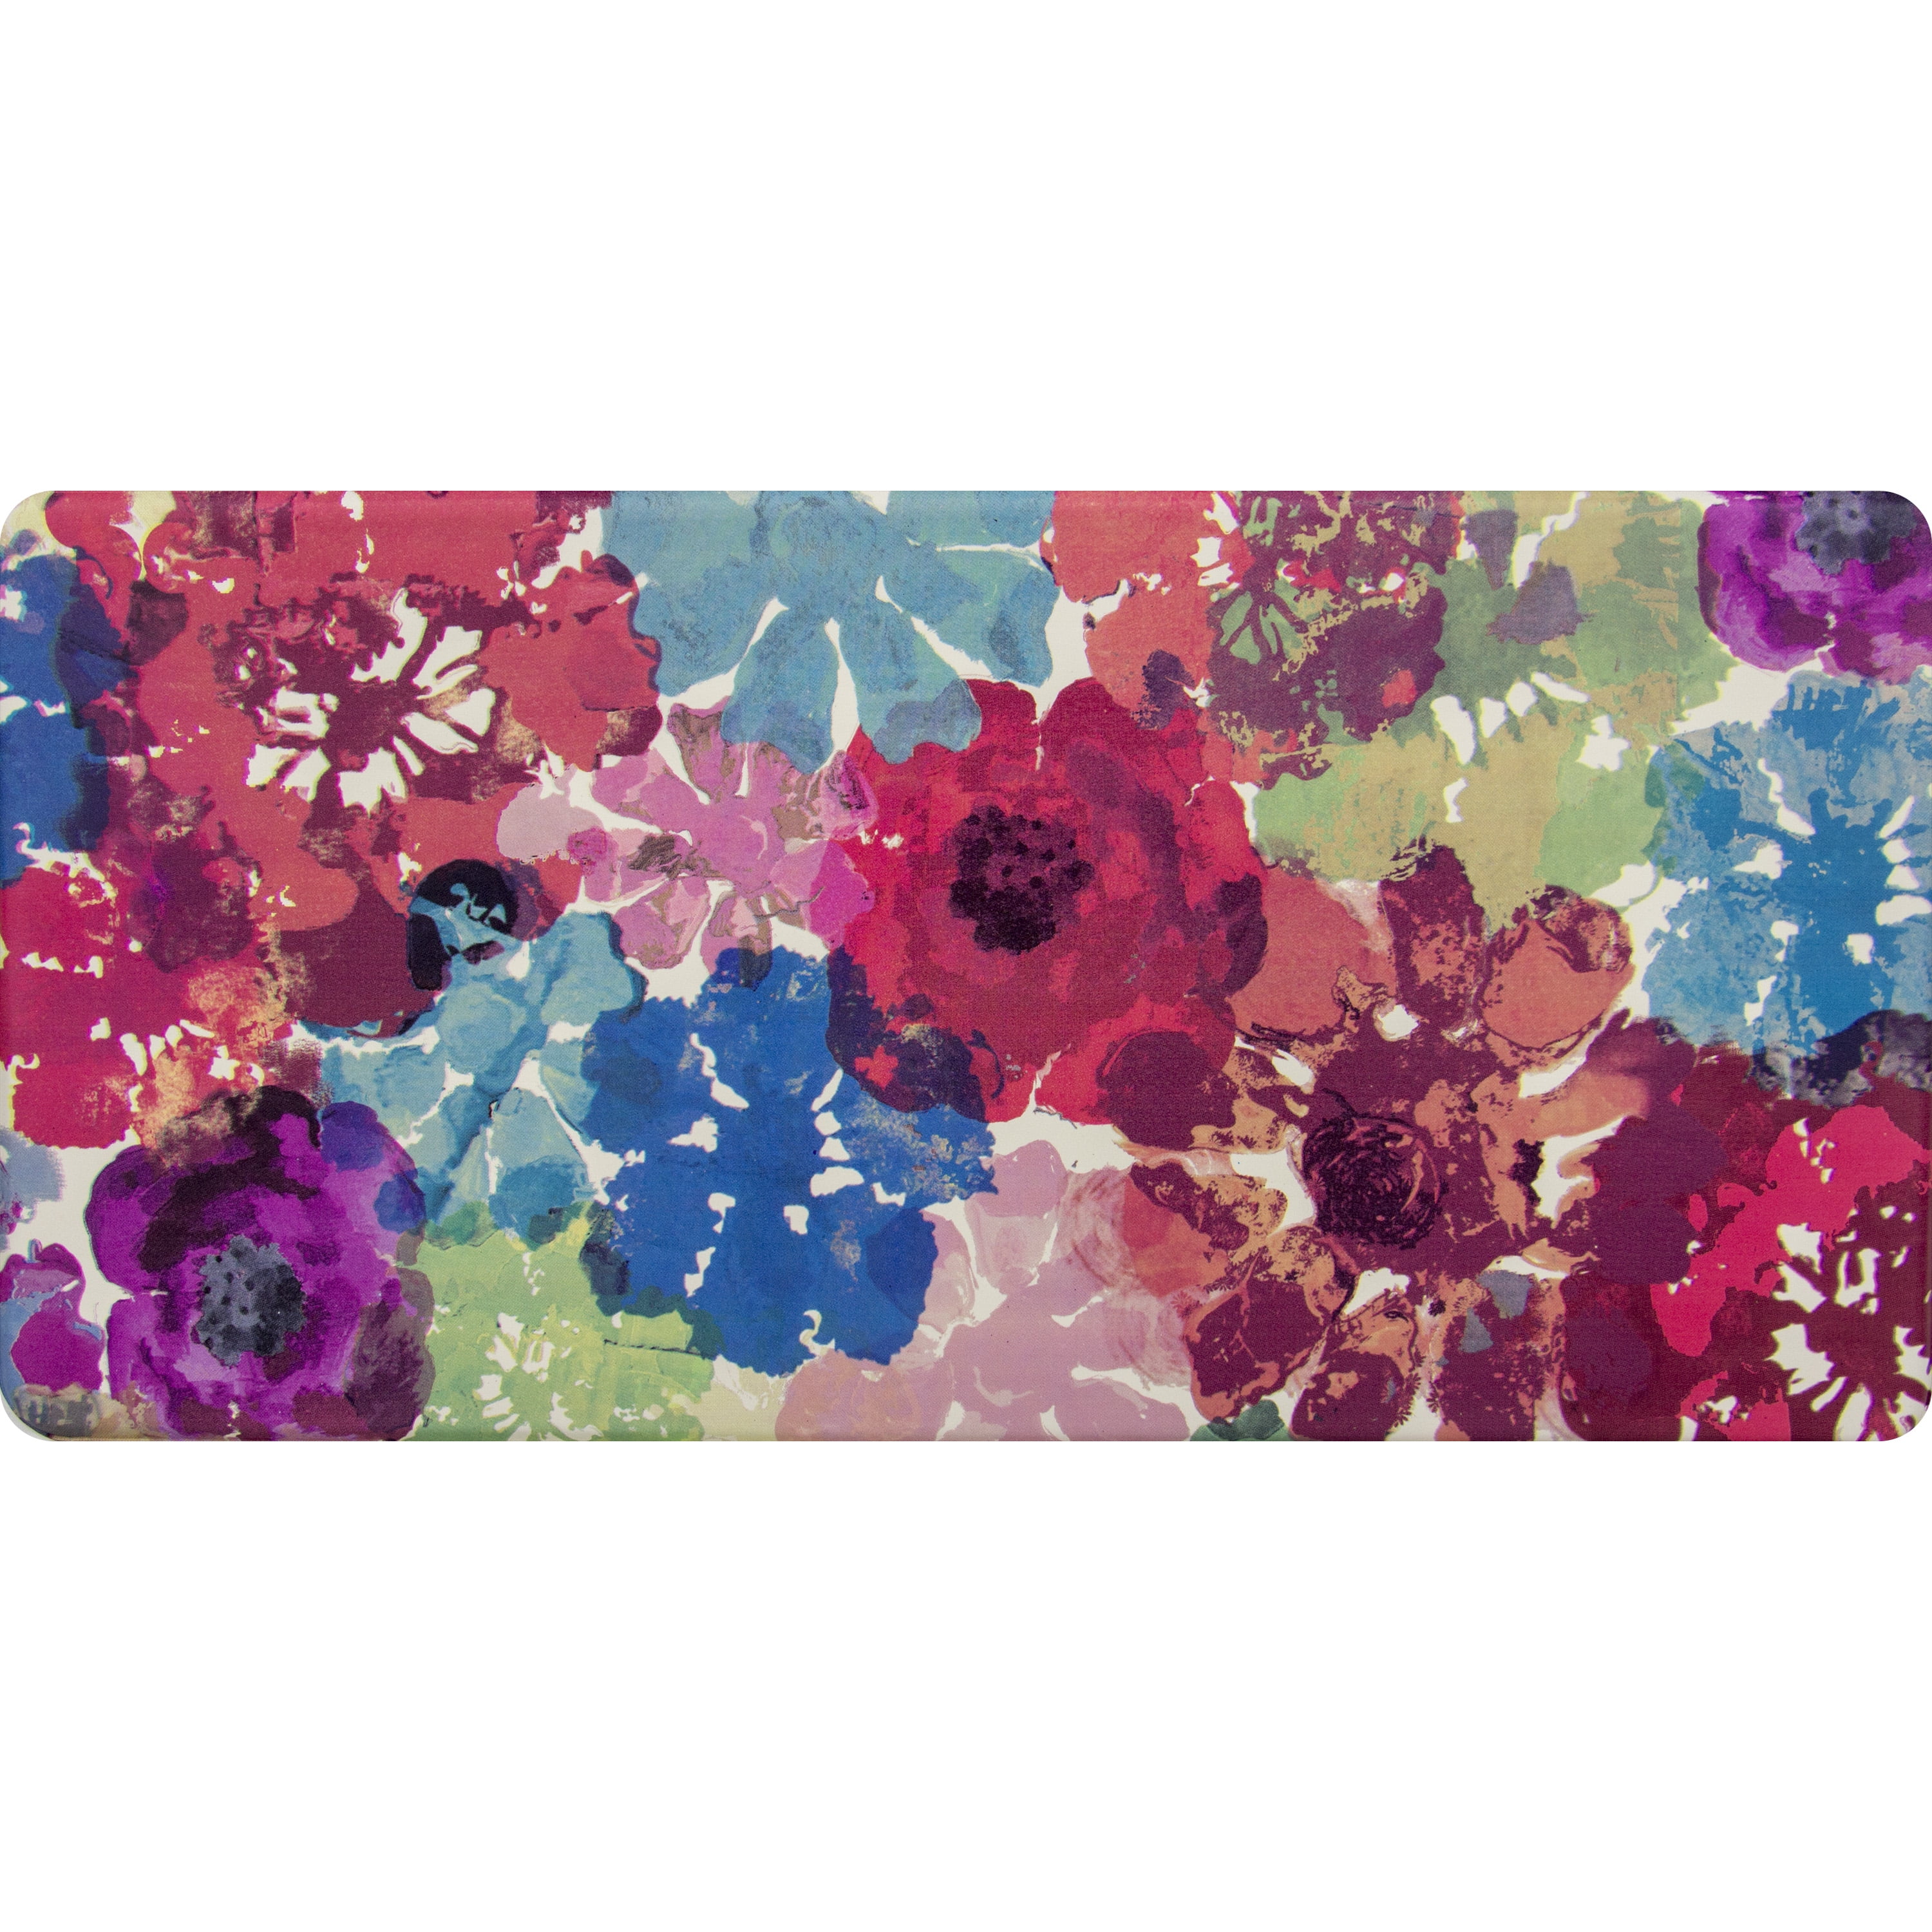 Soft Foam Area Rugs Watercolor Flowers Leaves Washable Non Slip Kitchen Rugs Bath Rug for Home Decor Indoor/Outdoor 23.6x15.7in 